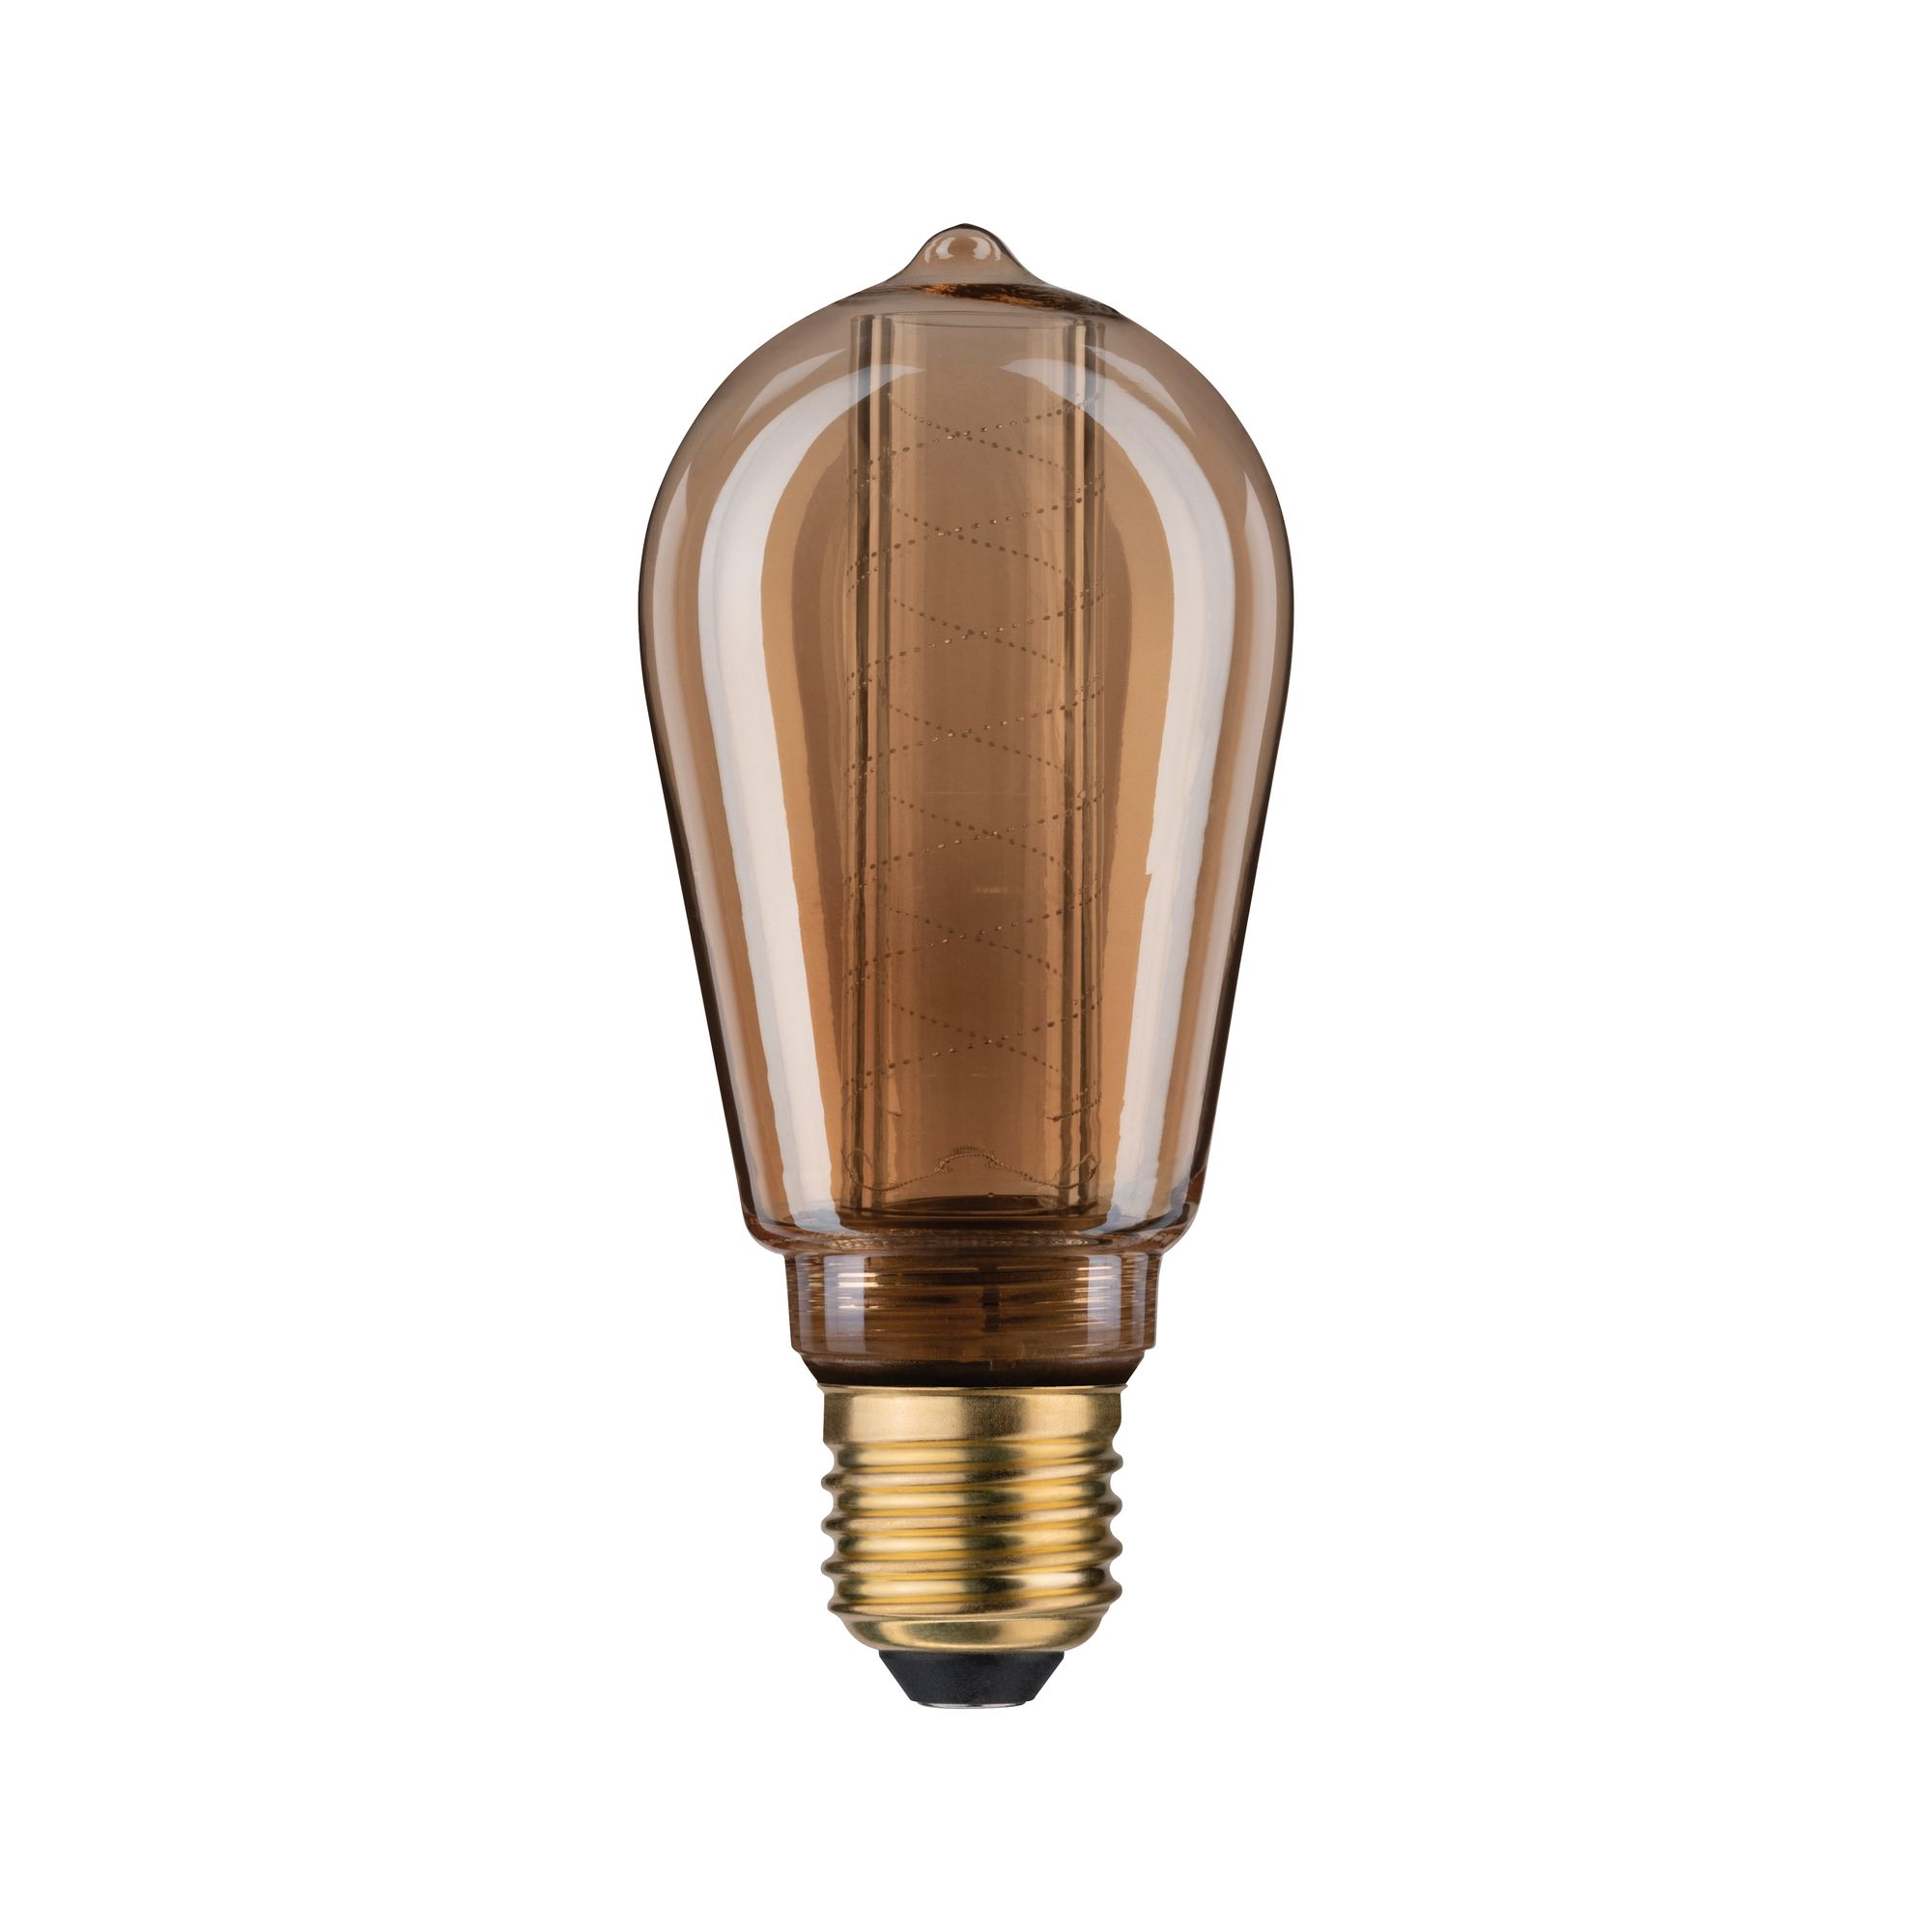 LED-Kolbenlampe ST64 'Inner Glow Spirale' E27 4 W (21 W), 200 lm warmgold + product picture